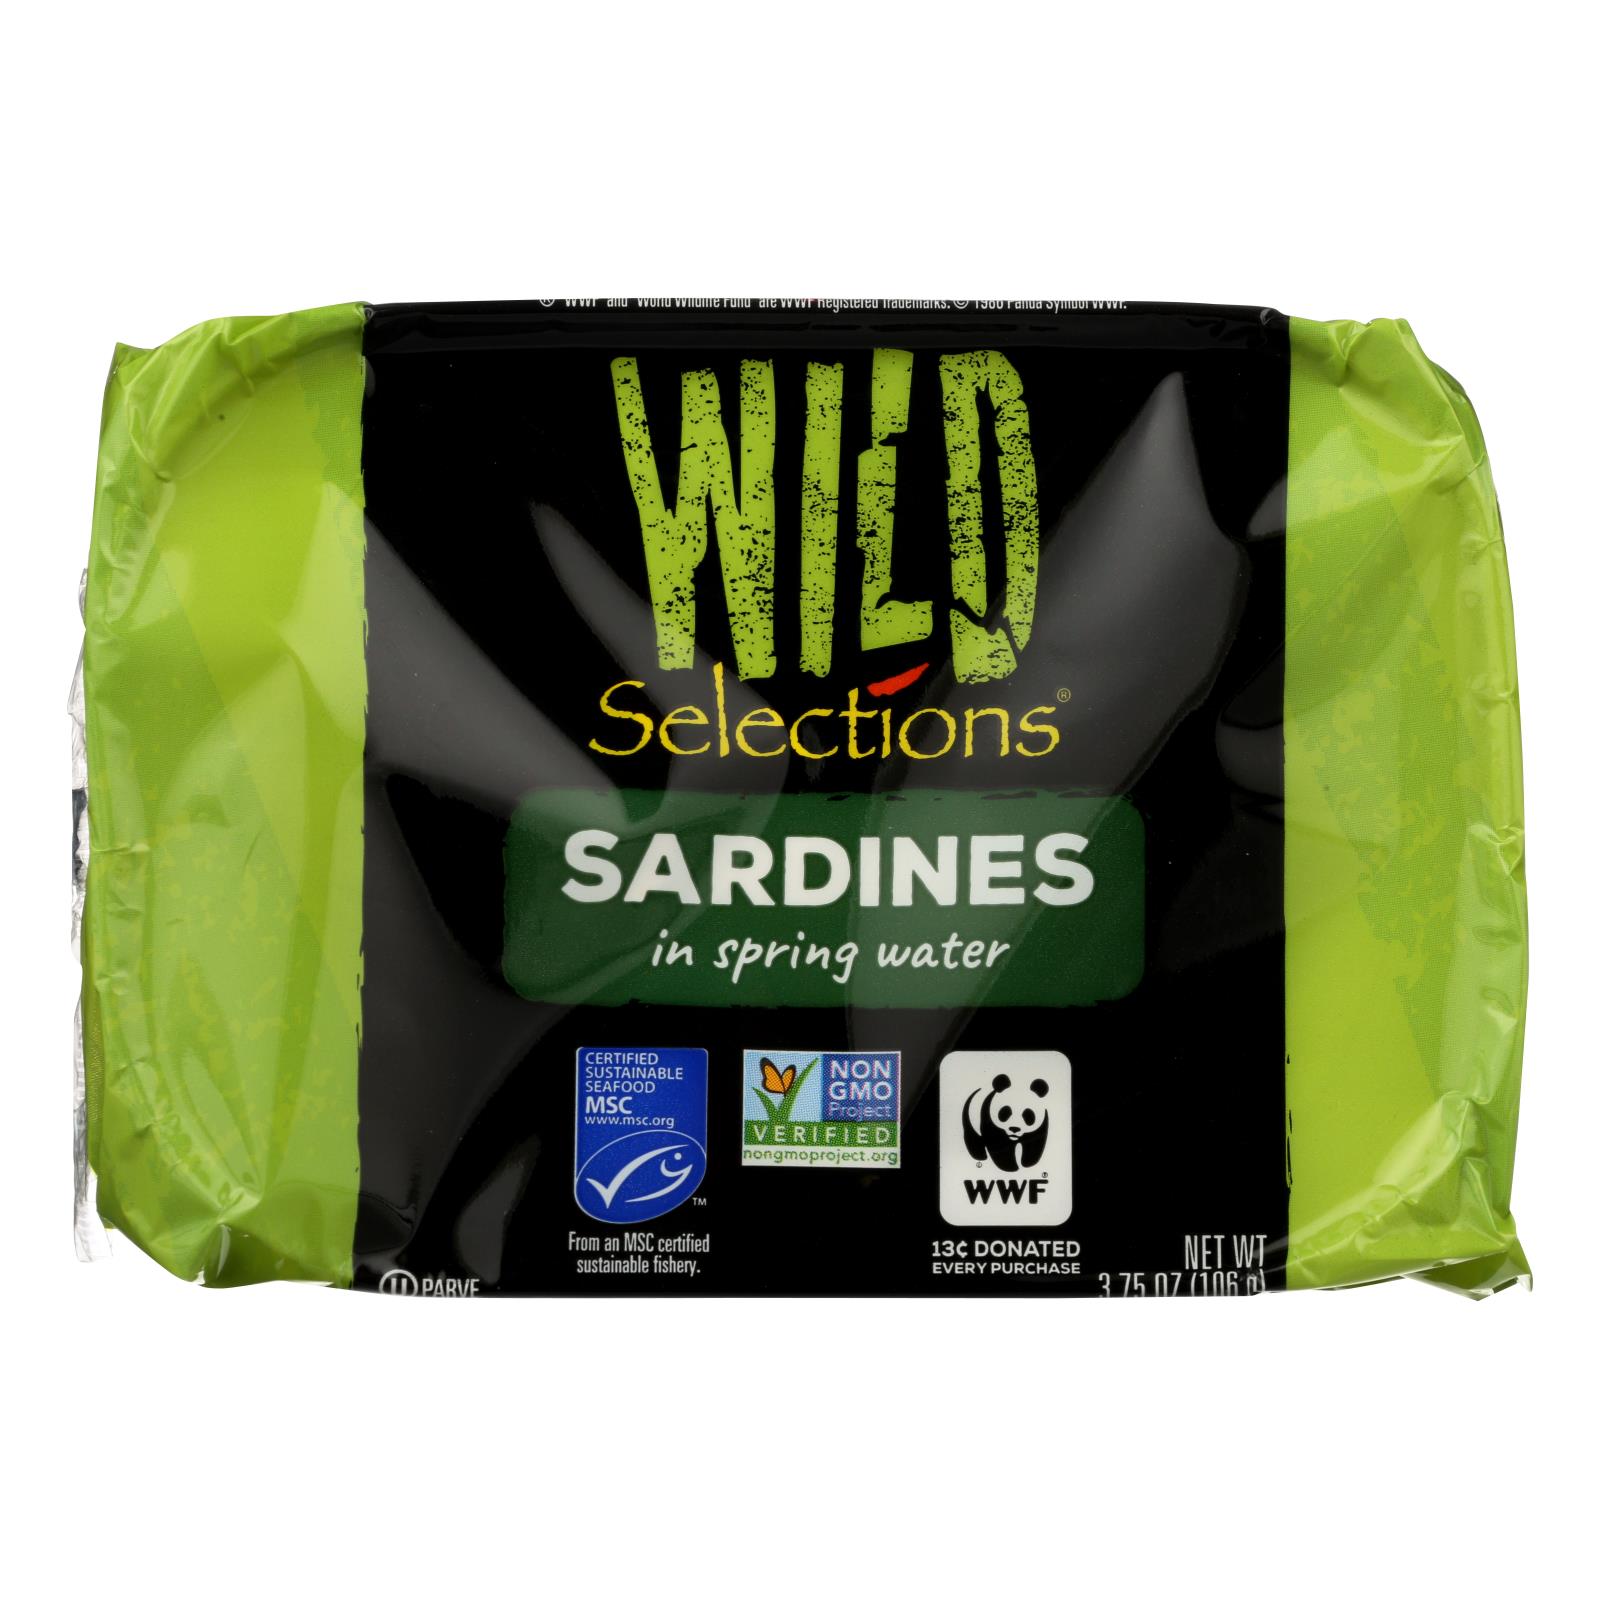 Wild Selections Sardines In Spring Water - 12개 묶음상품 - 3.75 OZ